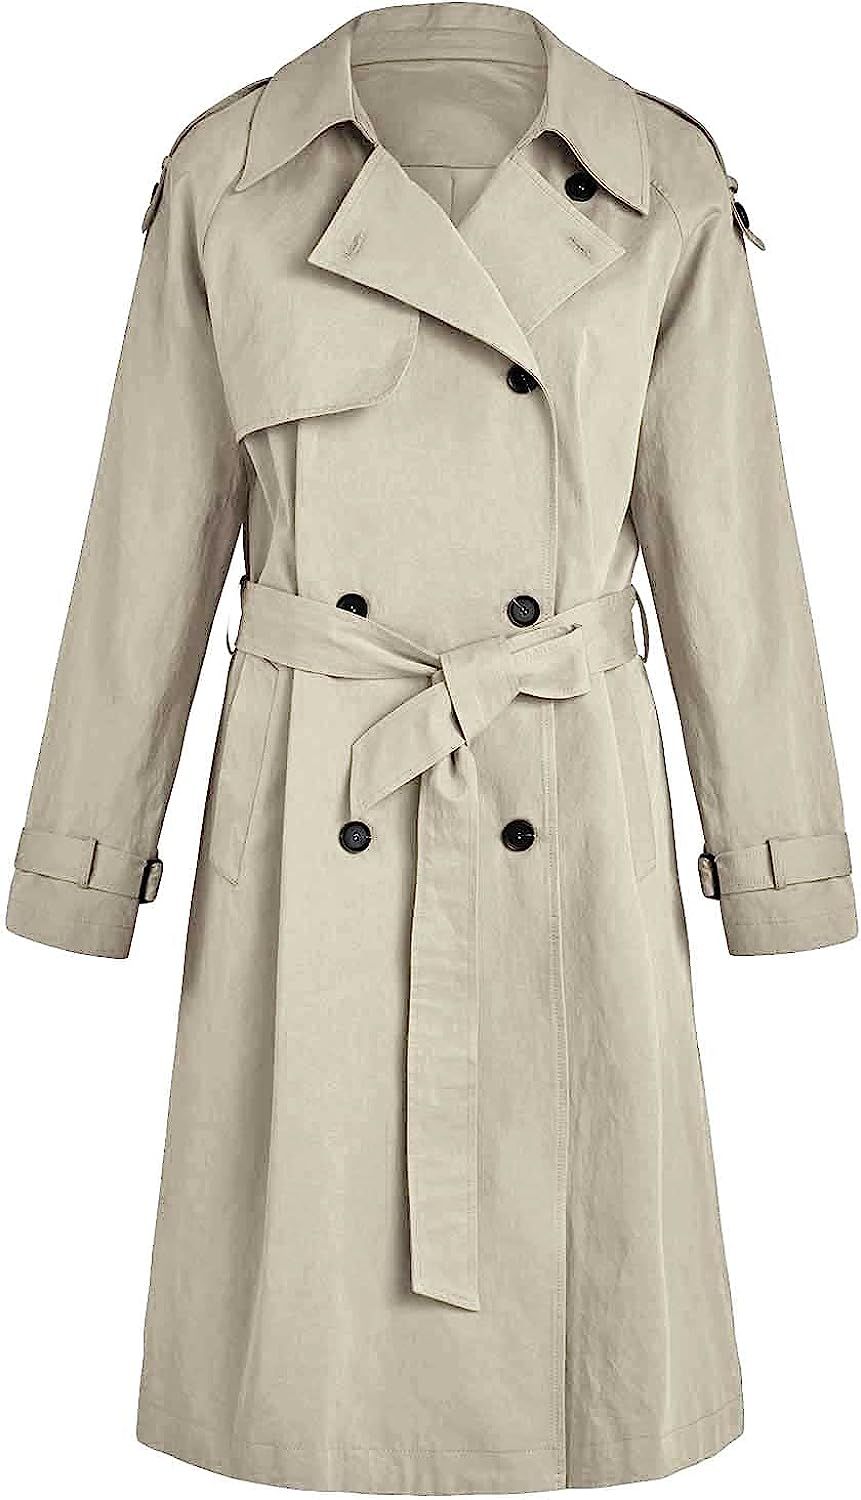 Makkrom Women's Double Breasted Long Trench Coat Windproof Classic Lapel Slim Overcoat with Belt | Amazon (US)